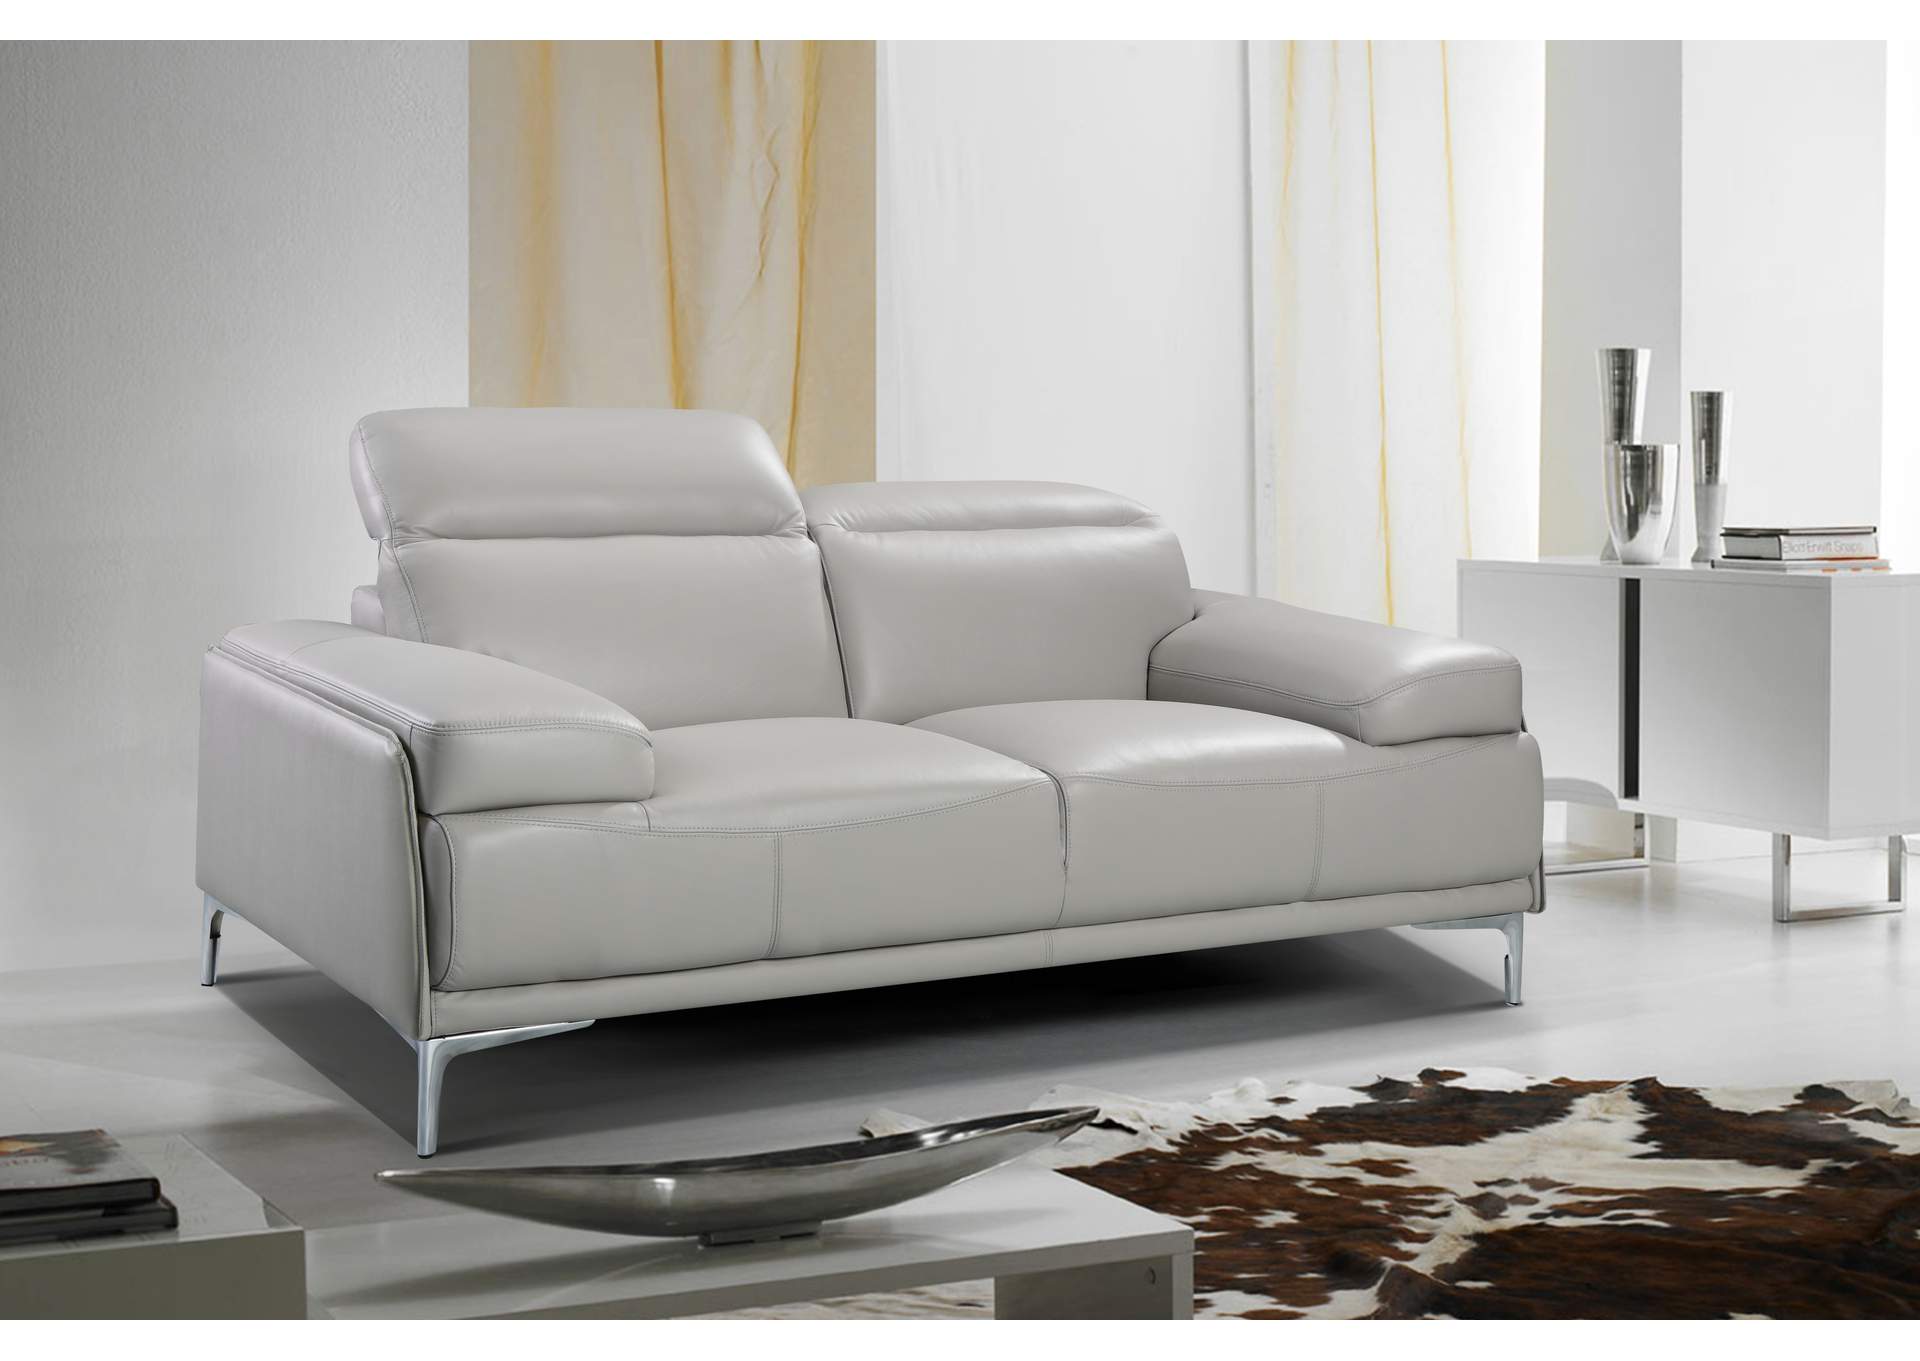 Nicolo Love Seat in Light Grey Best Buy Furniture and Mattress